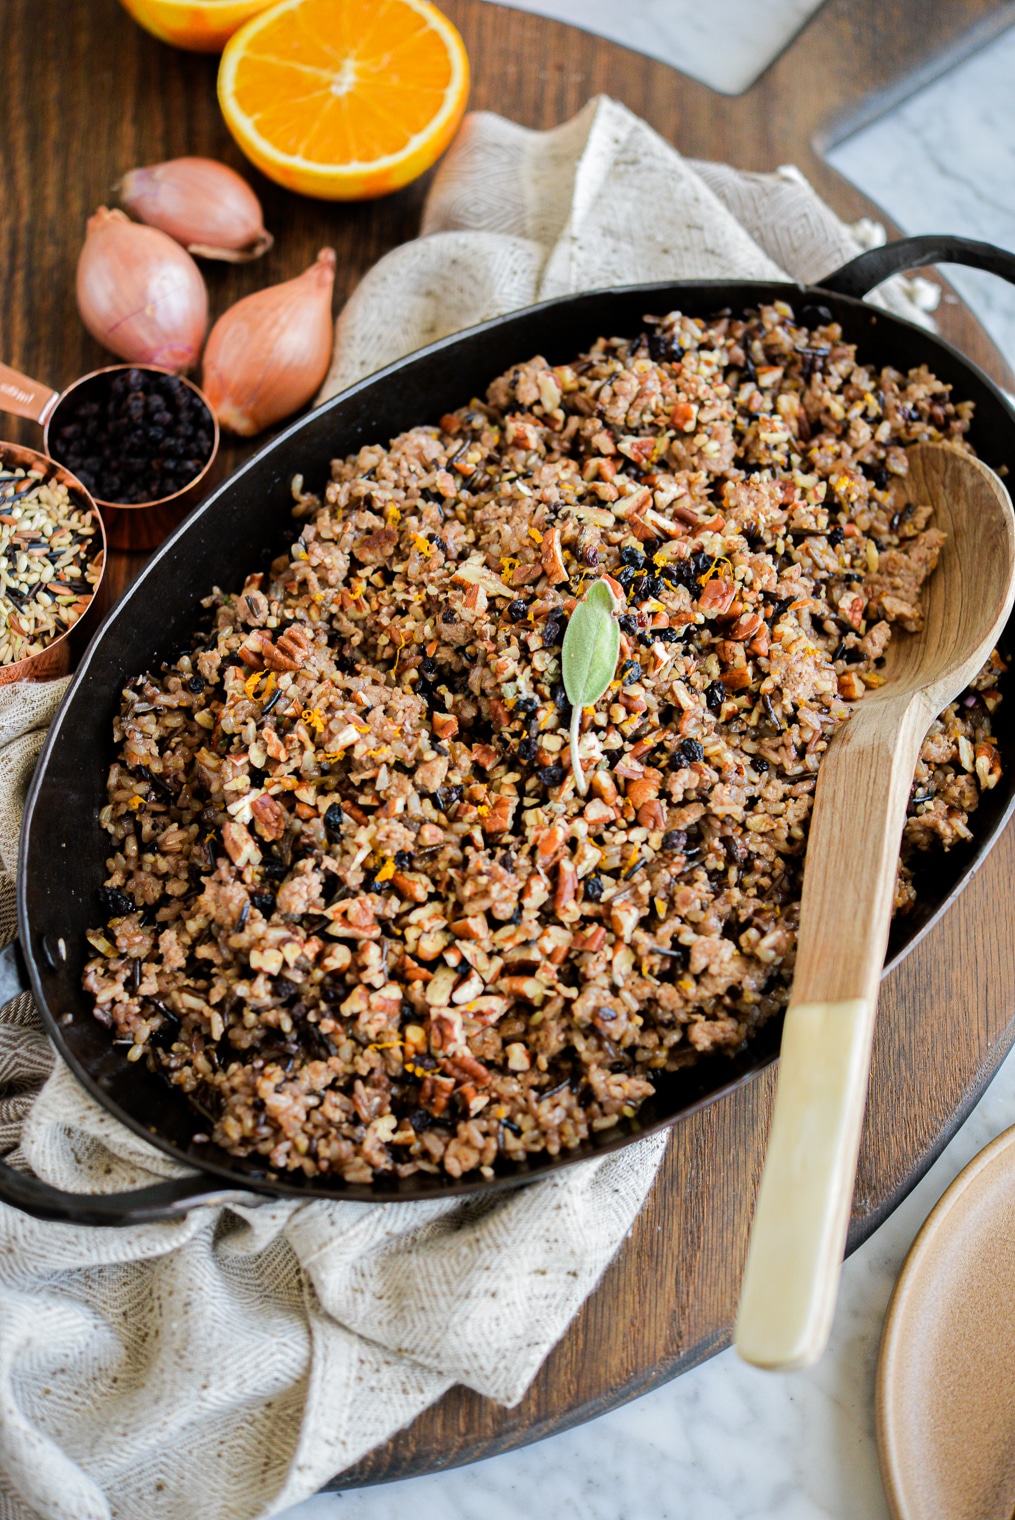 a dish of wild rice stuffing sitting on a wood board next to a halved orange, and whole shallots